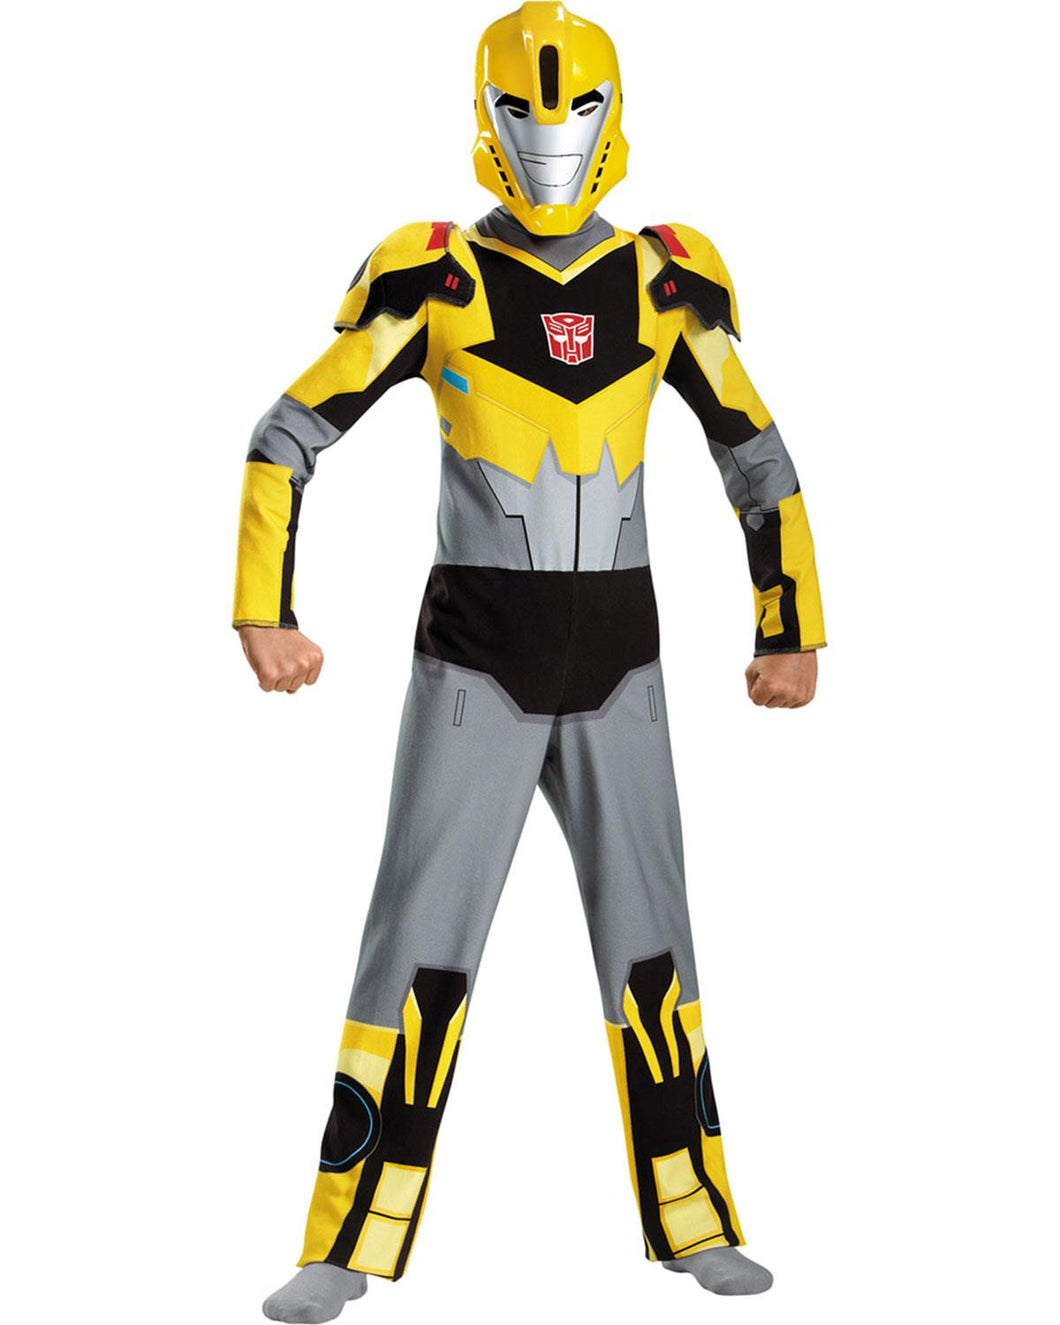 Transformers: Bumblebee Classic Child Animated Costume Size Small 4-6